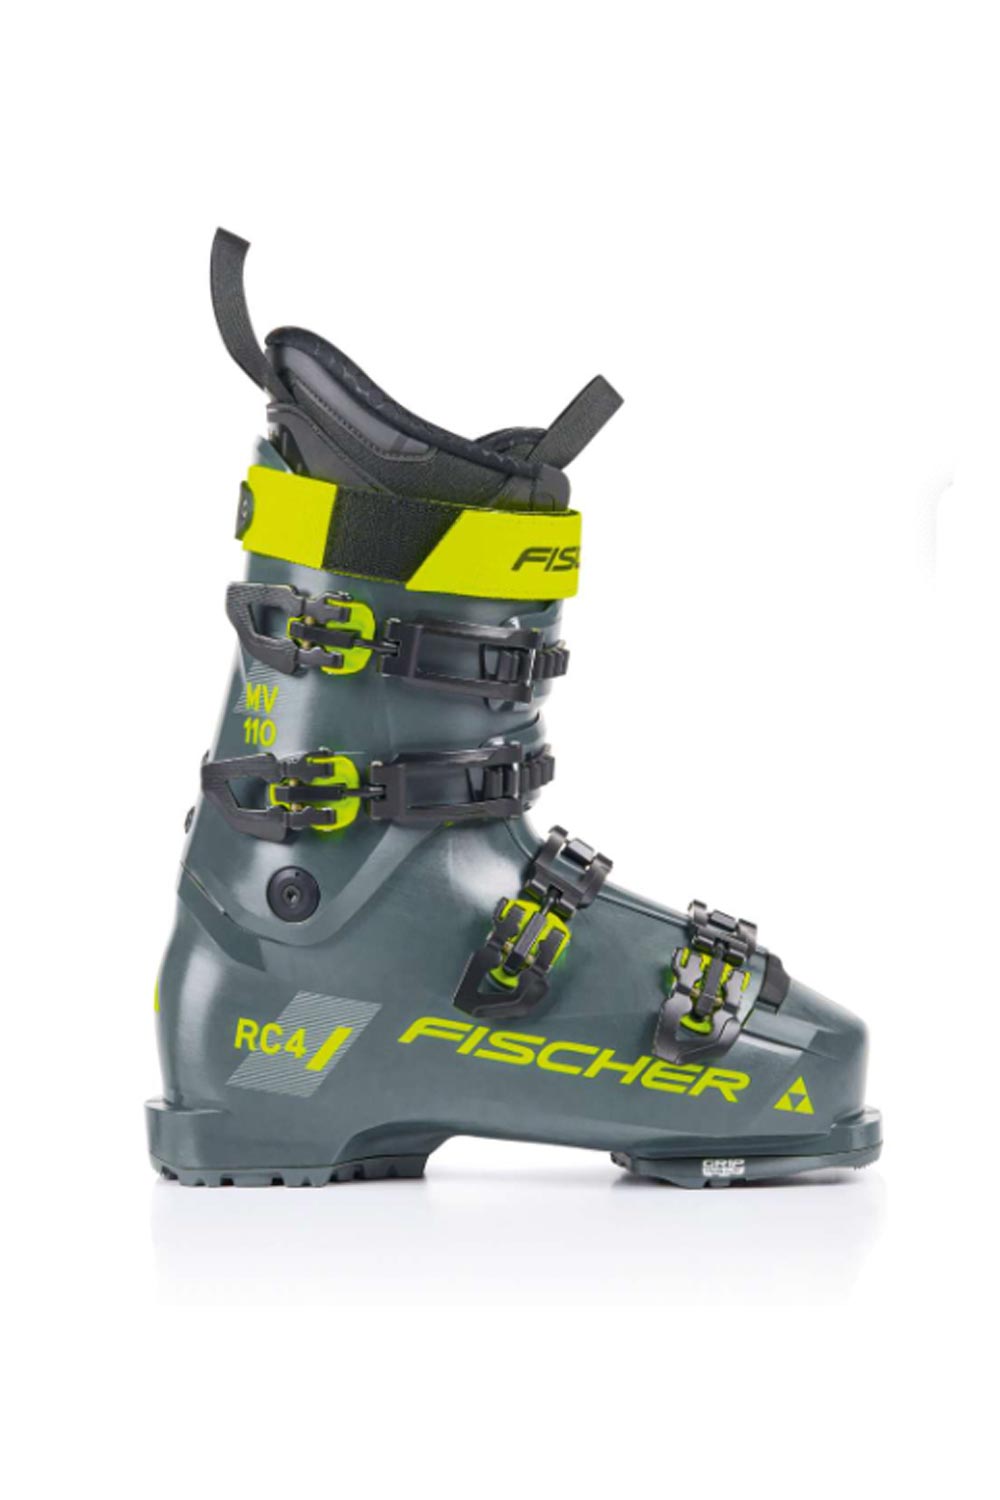 Fischer RC4 110 ski boots, gray with bright yellow accents